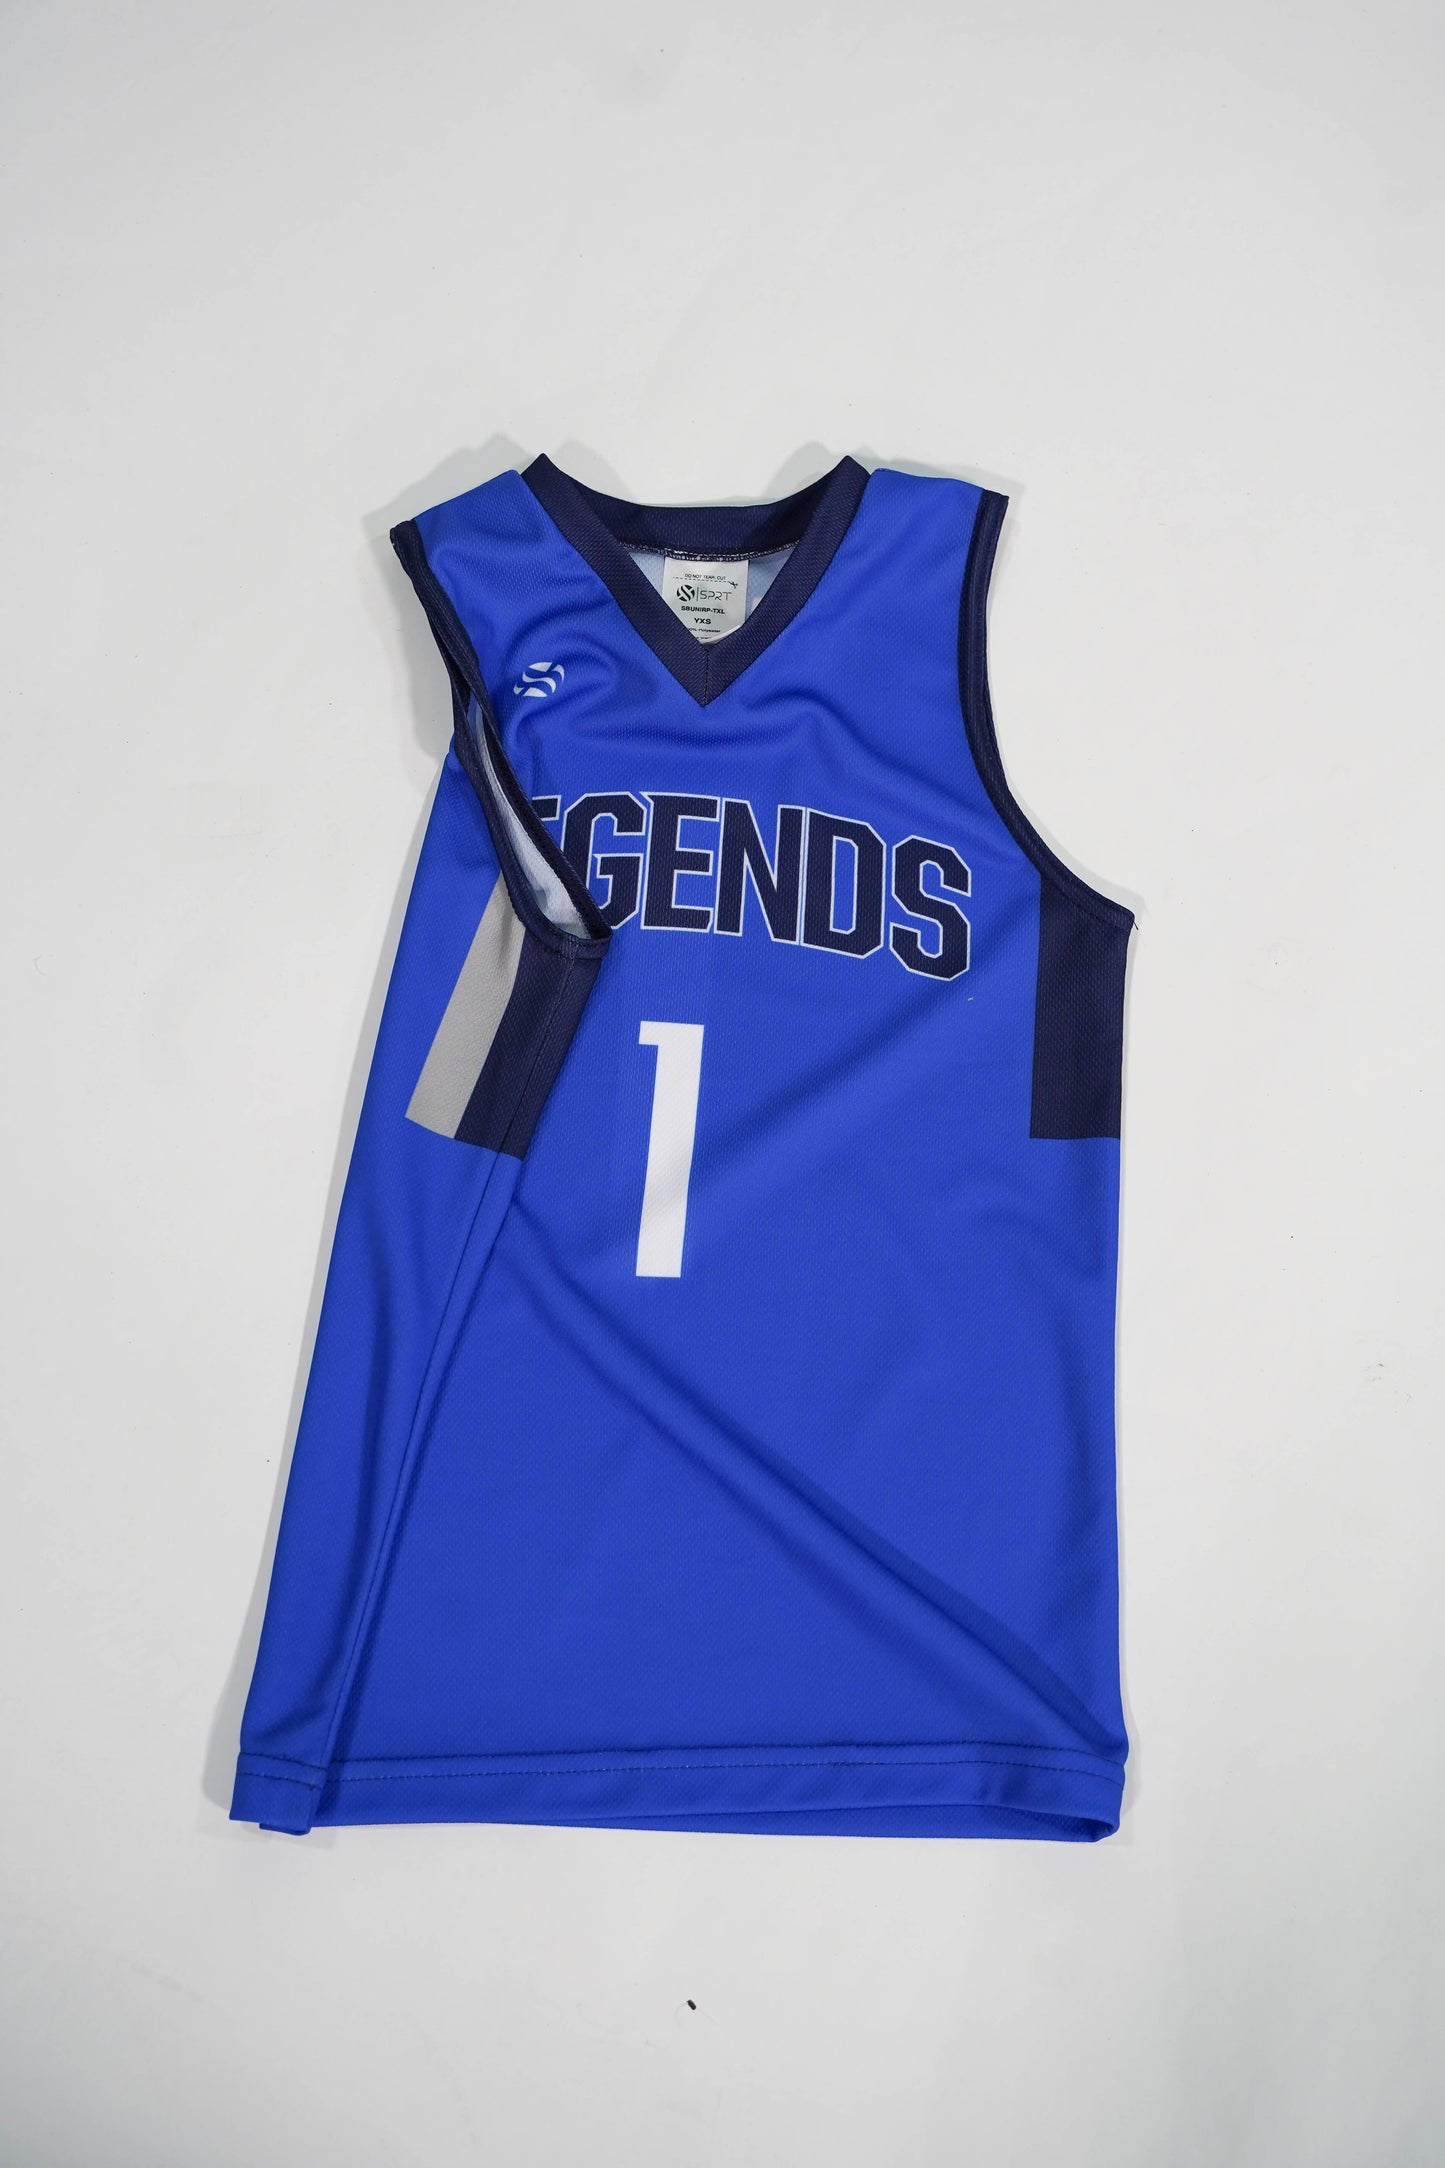 Texas Legends Youth Replica Jersey